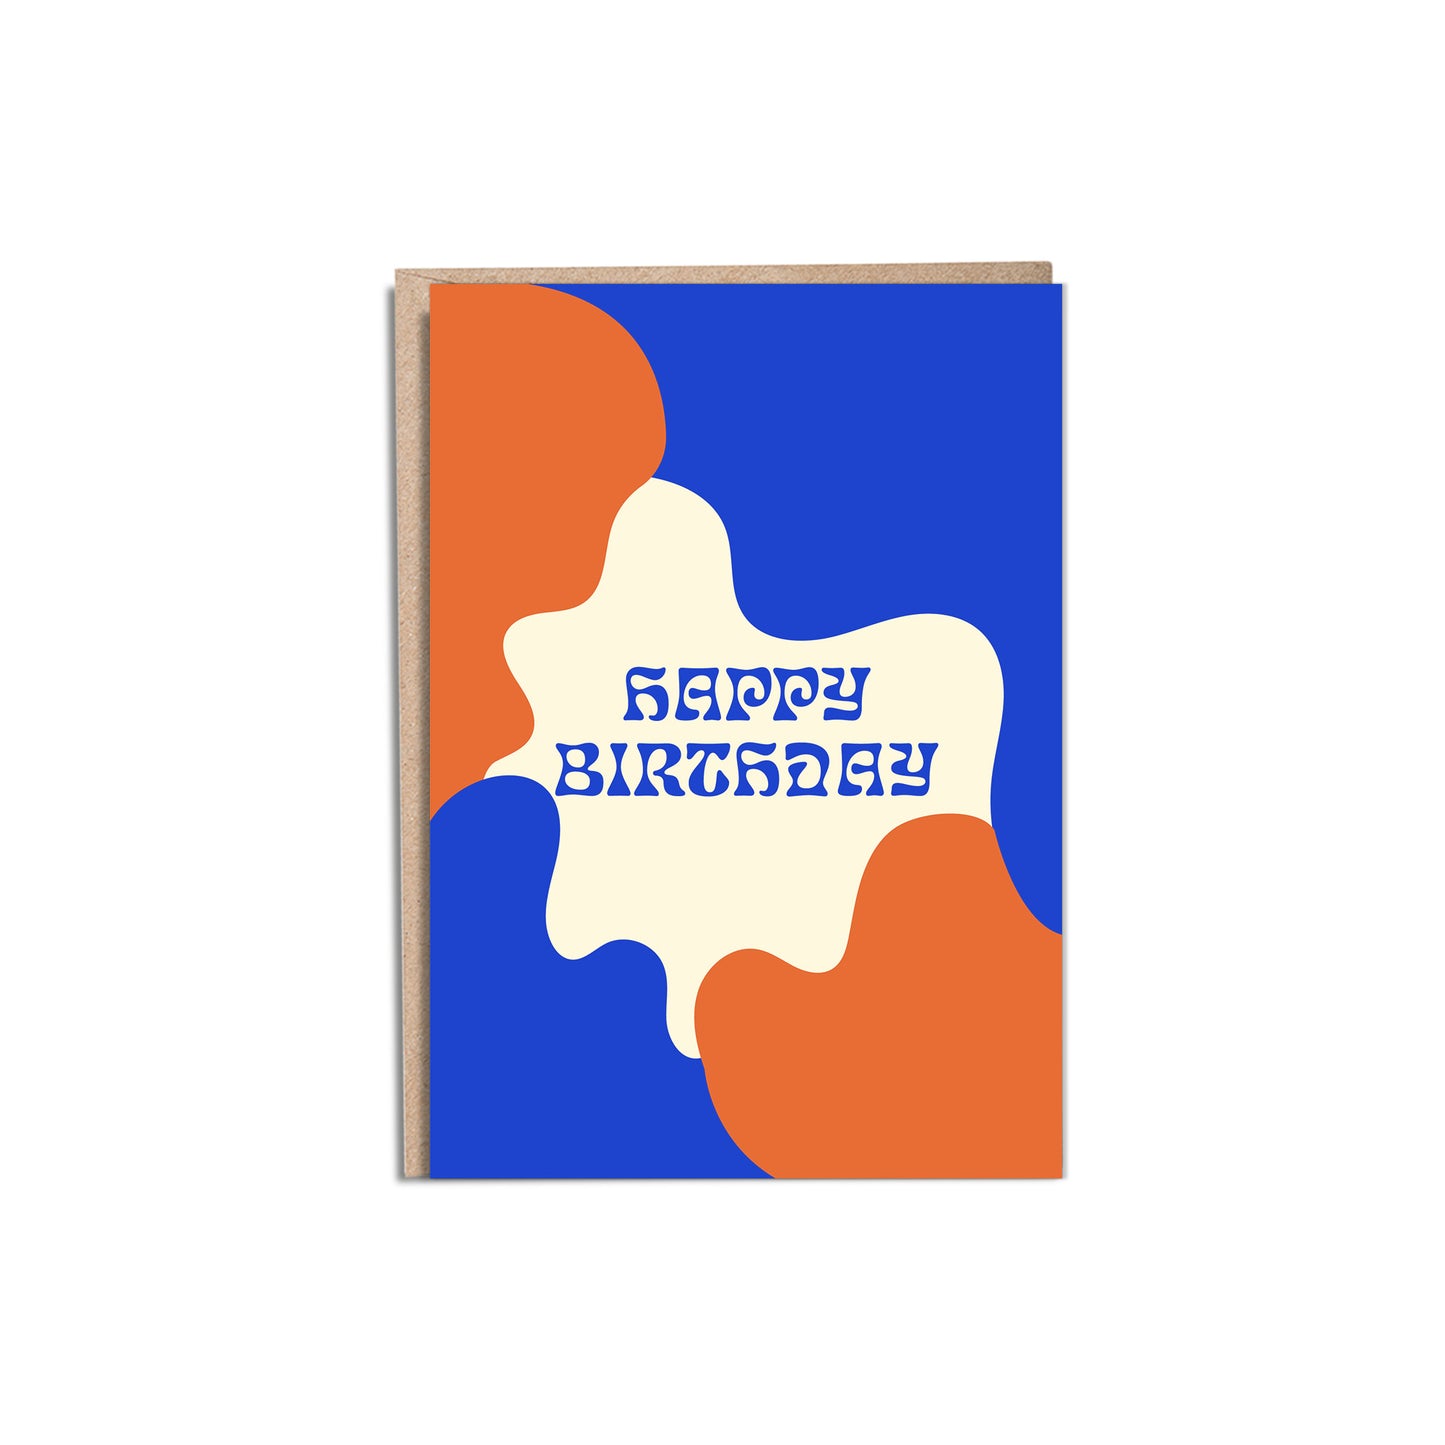 Birthday Cards, Assorted Box of 8